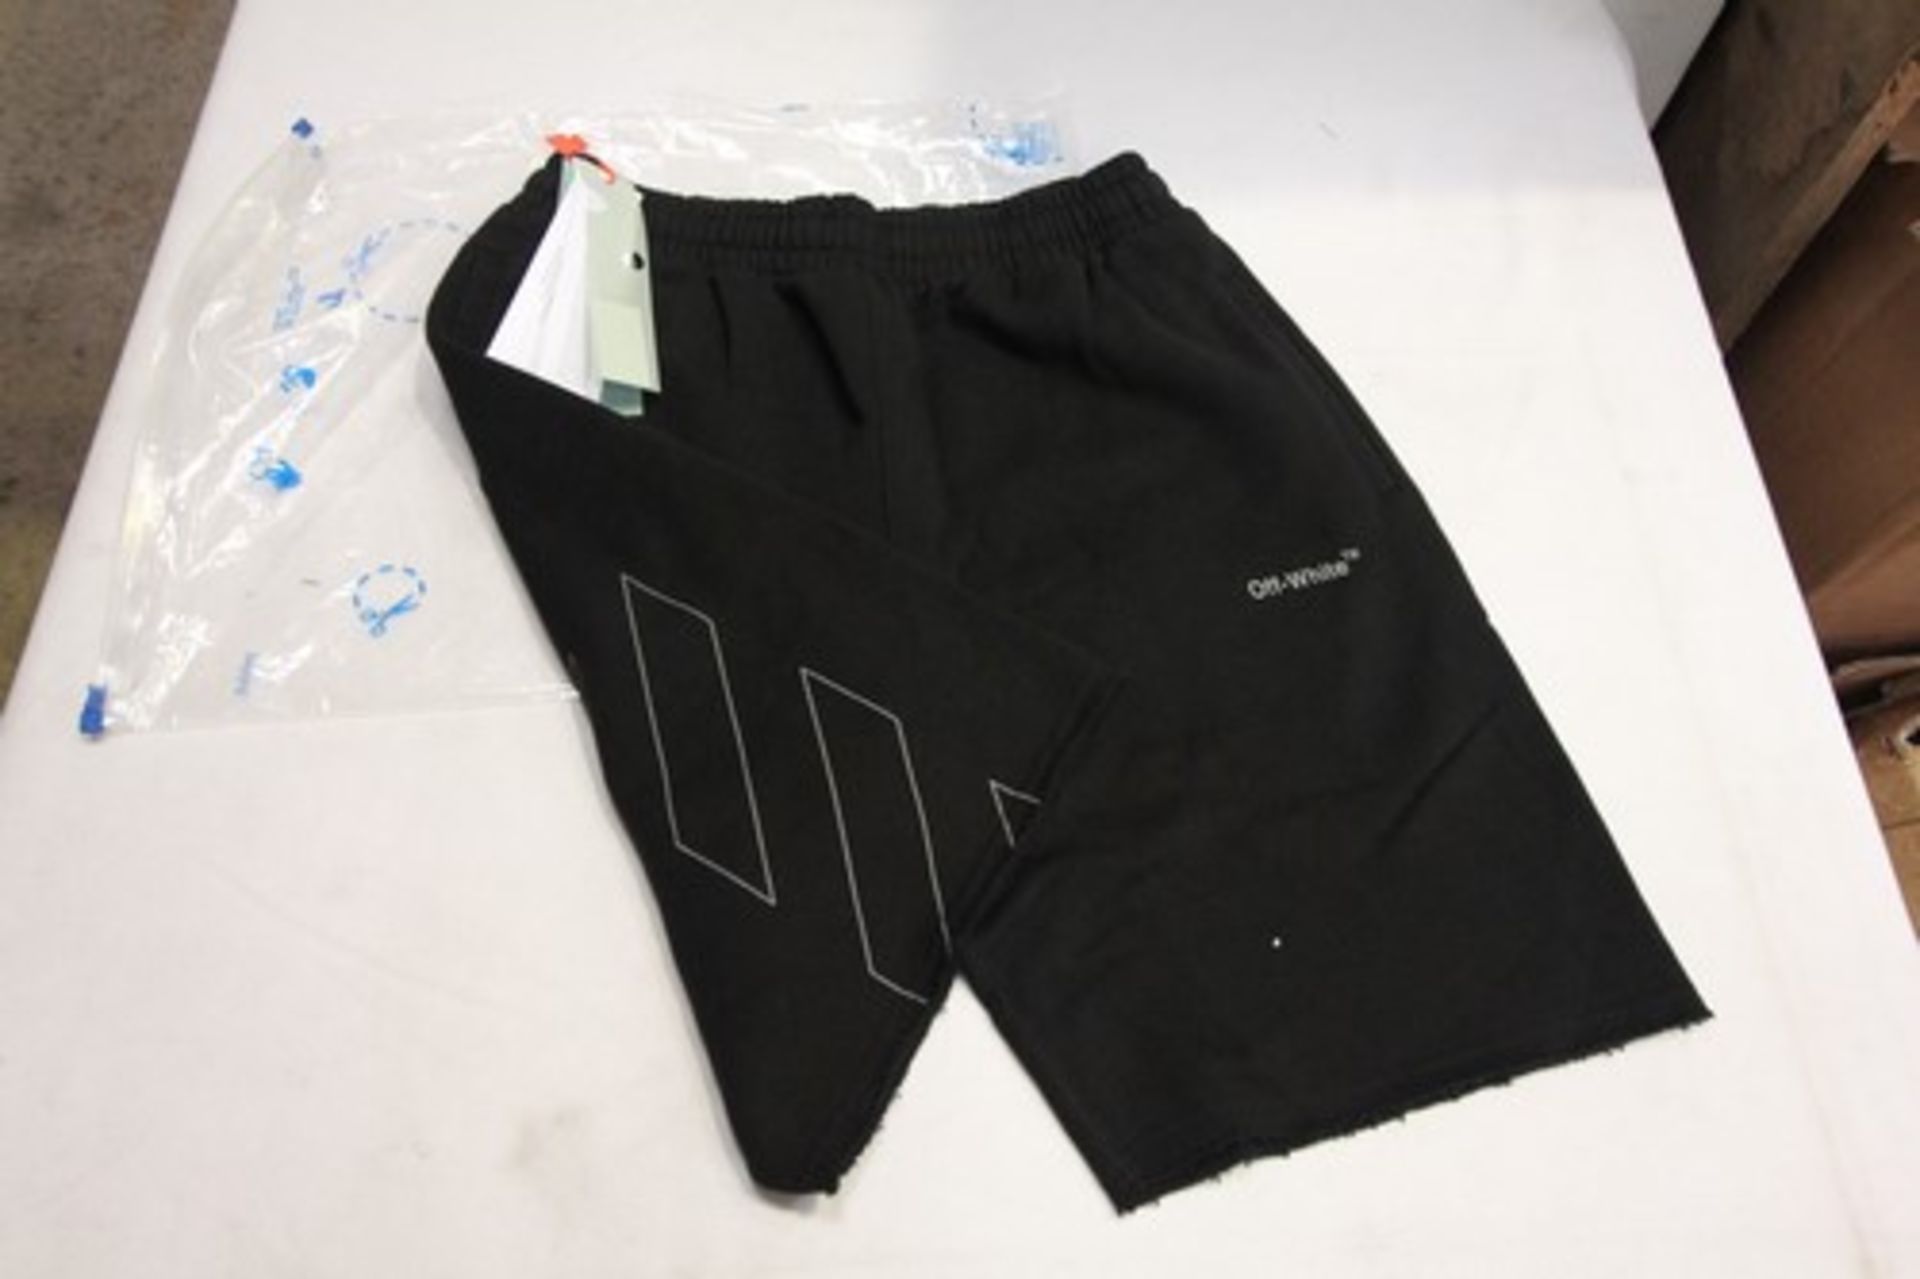 1 x pair of Off White black diag outline sweat shorts, size M - New with tags (E2A)